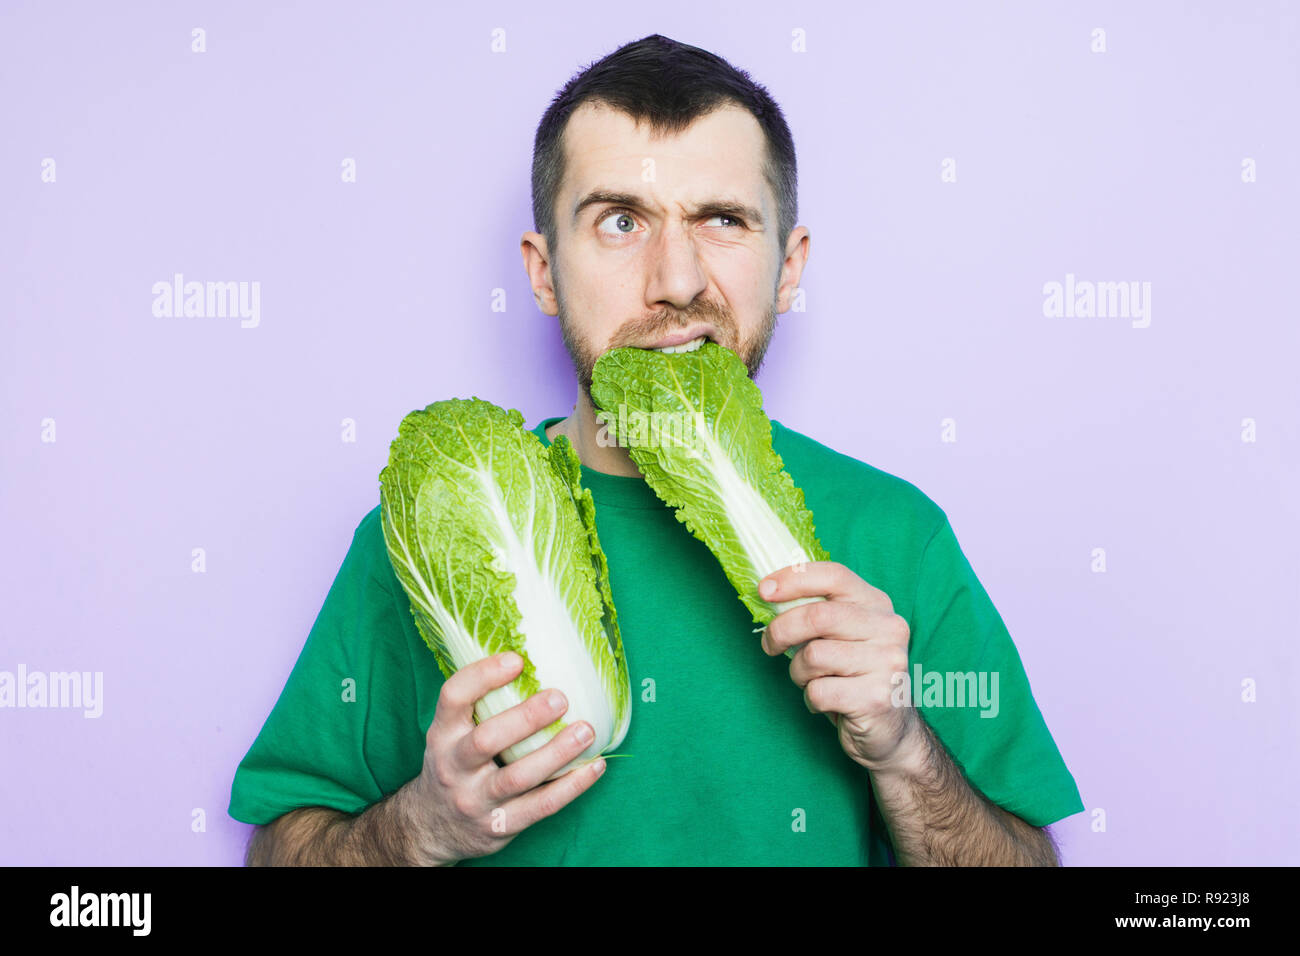 Young man biting on a leaf of Beijing napa cabbage, doubt face expression. Light purple background. Stock Photo